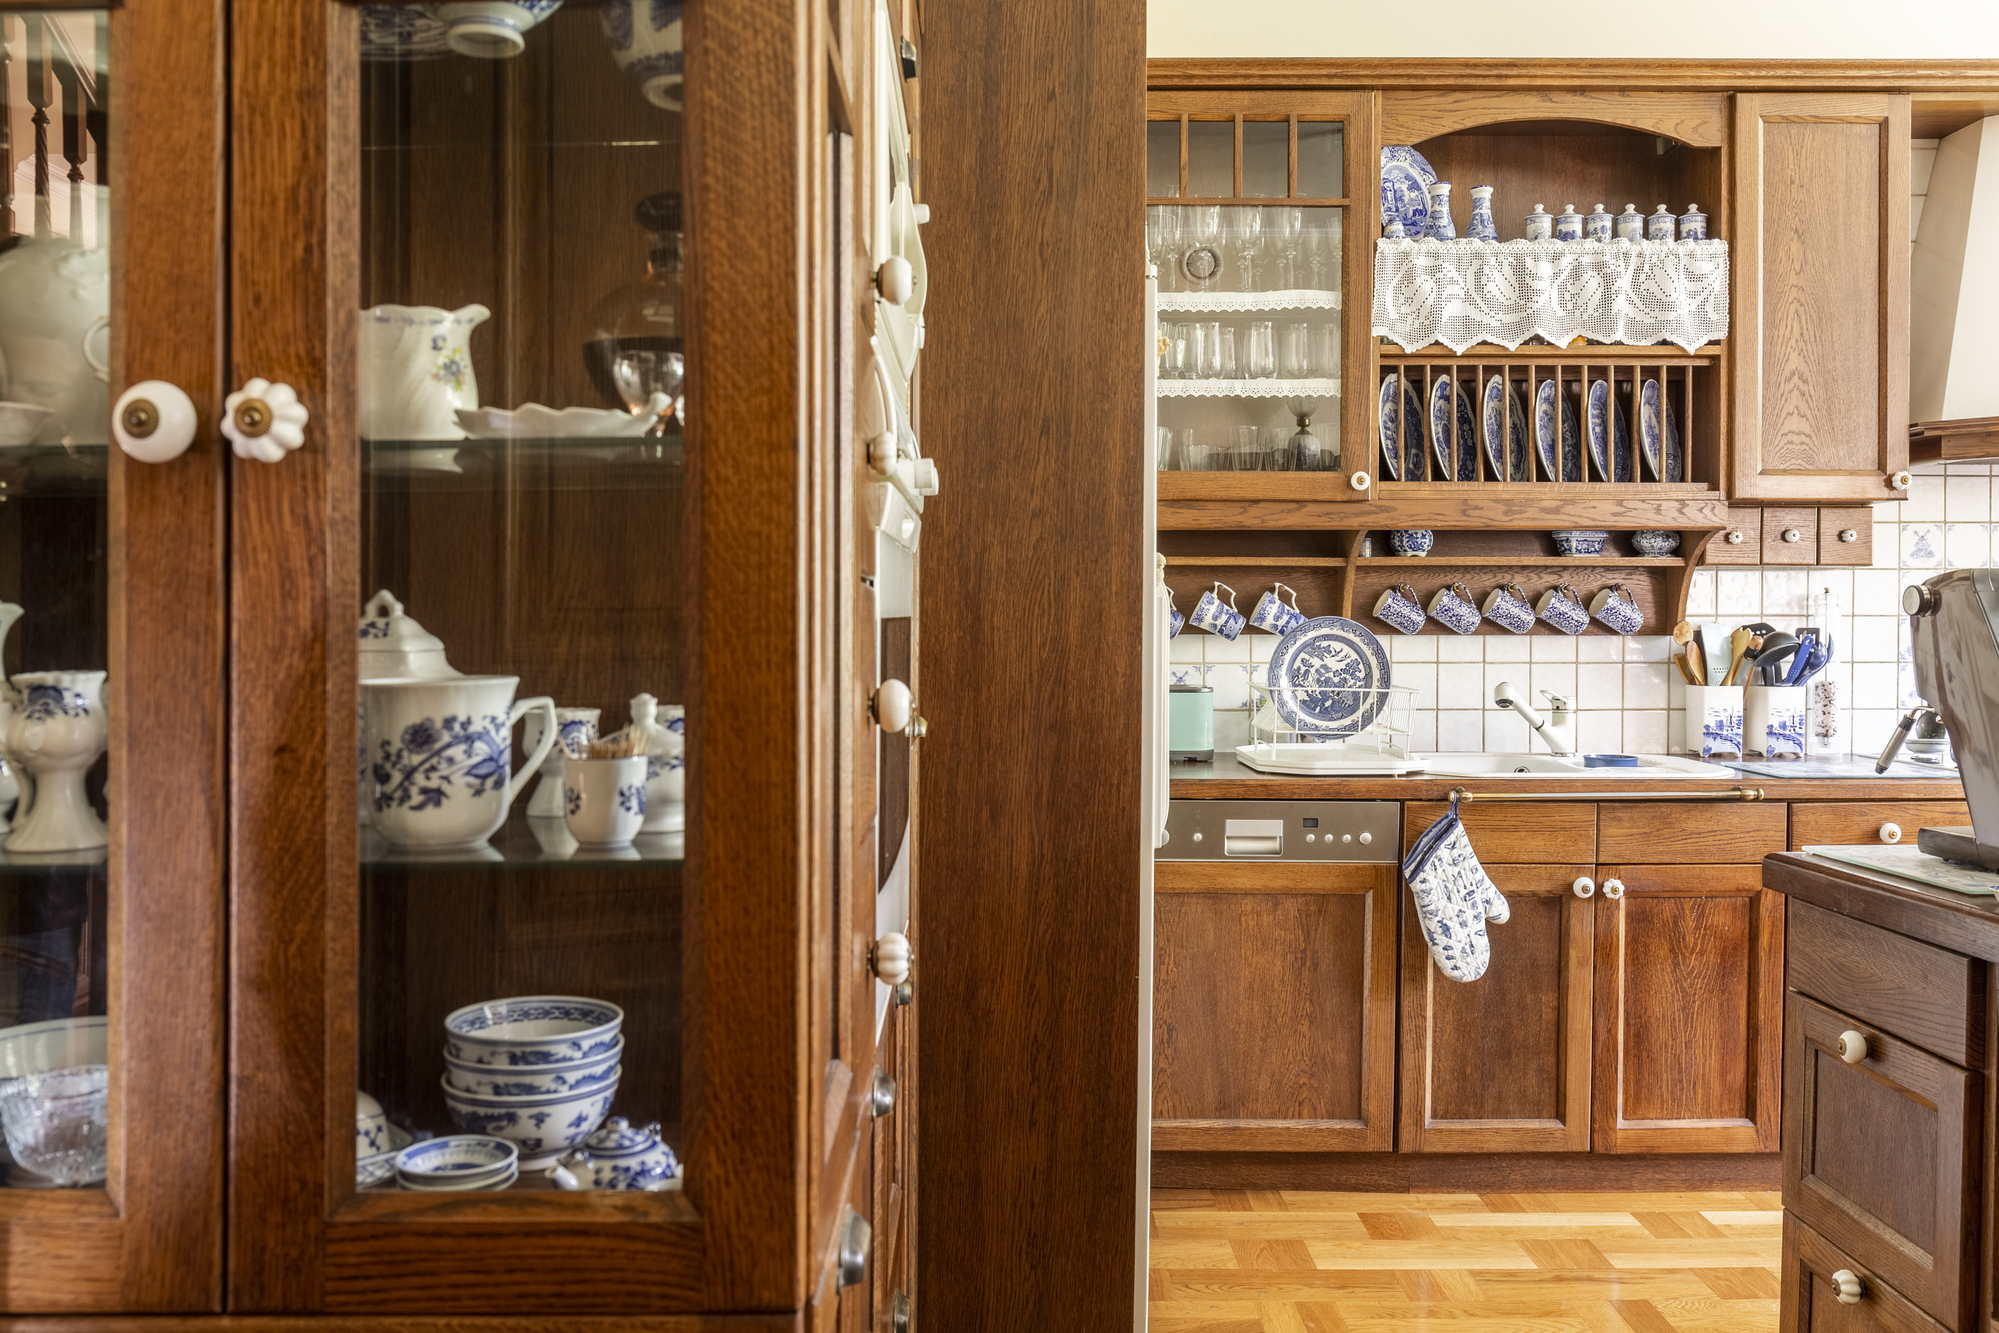 Old fashioned wooden cabinets with white and cobalt blue china in kitchen interior.